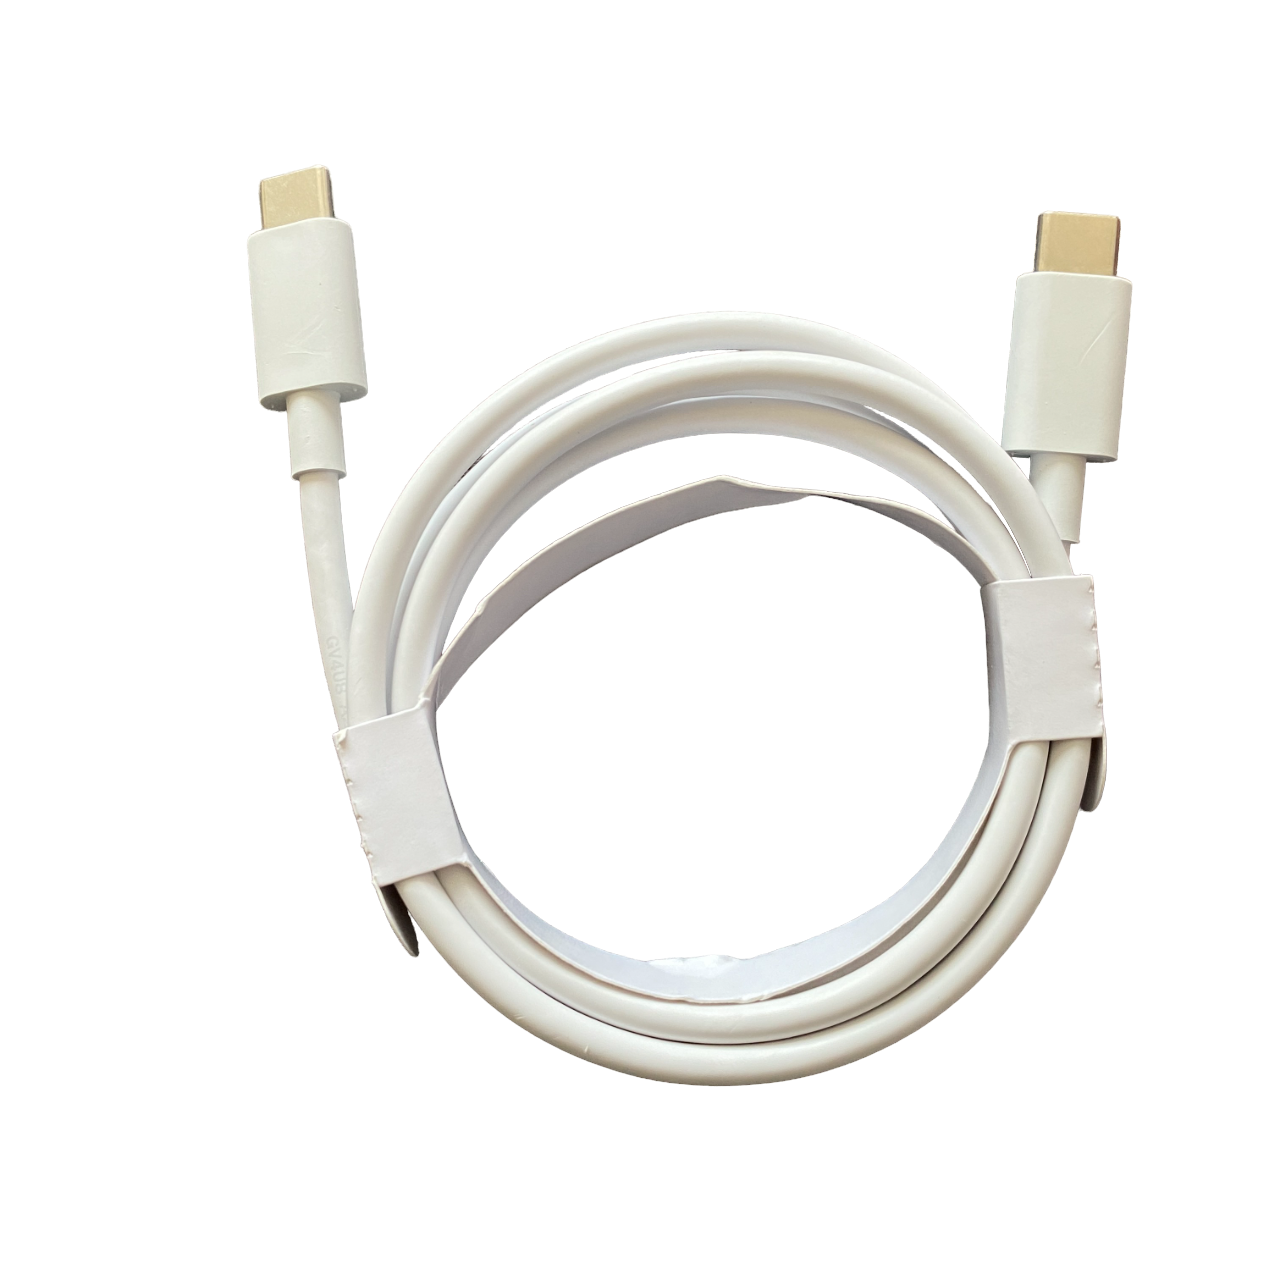 Google Pixel USB-C to USB-C Cable - mosaccessories